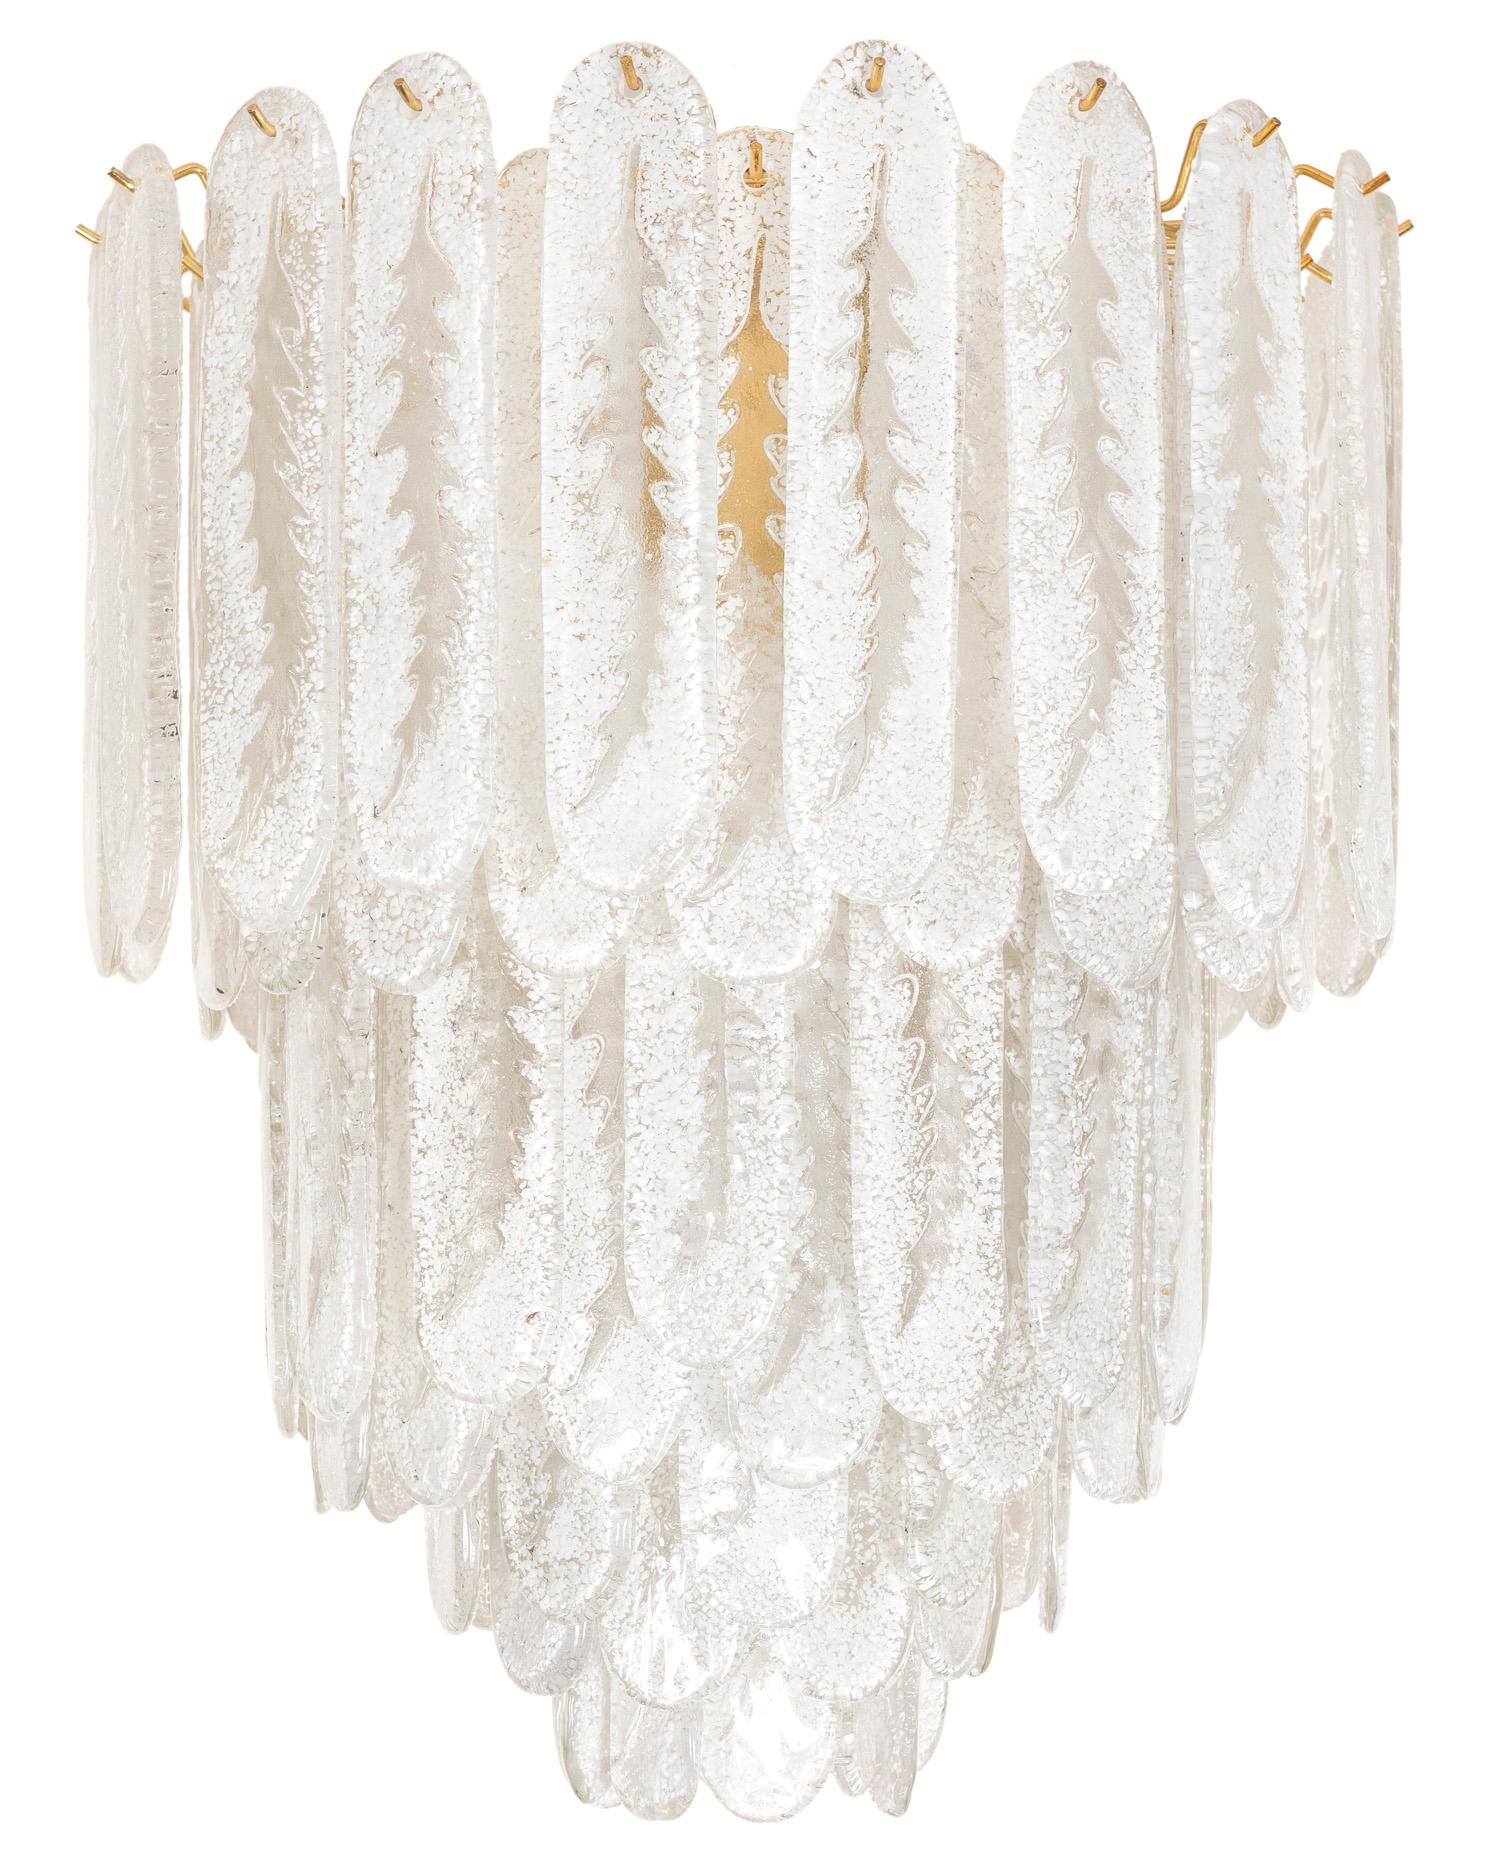 This dazzling multi layered Murano light is adorned with rounded rectangular frosted glass surrounding a brass interior frame. It is wired for North America.